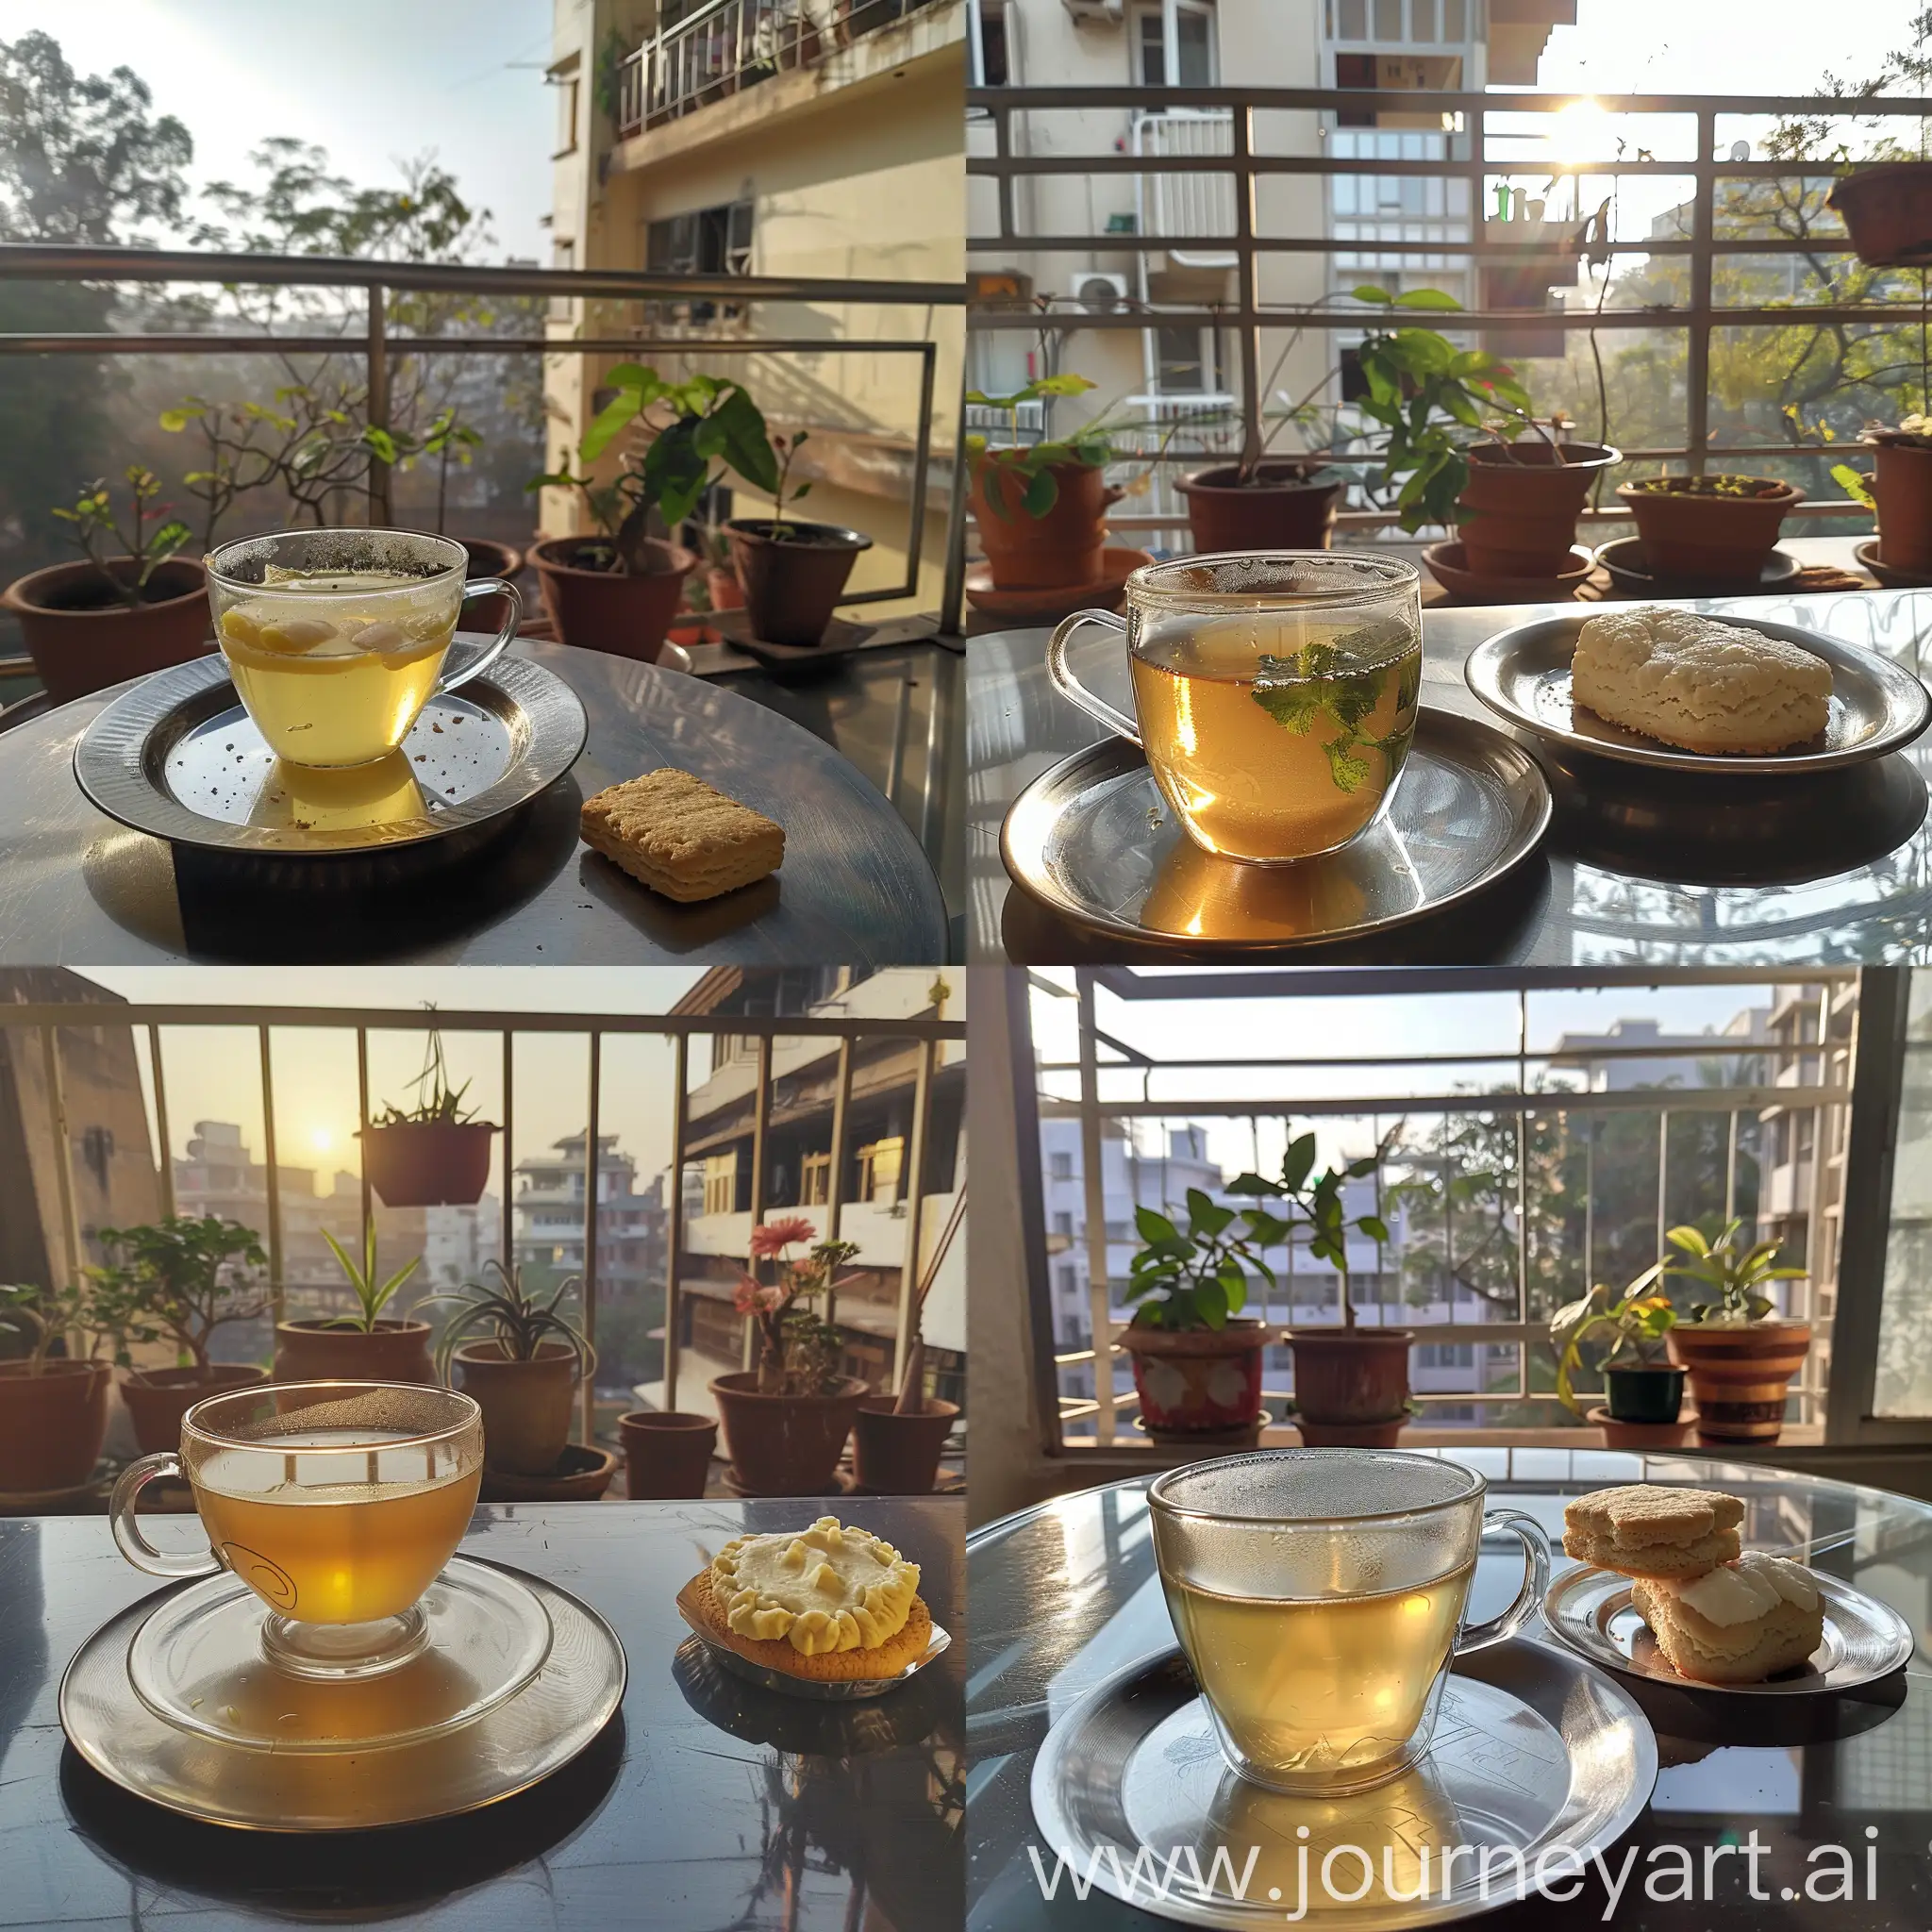 Hot ginger tea in a transparent tea cup and a a cream biscuit on a steel plate . Both are placed on a table facing the balcony in a house on 10th floor. The balcony has pots with plants. It is early morning and the sun is rising